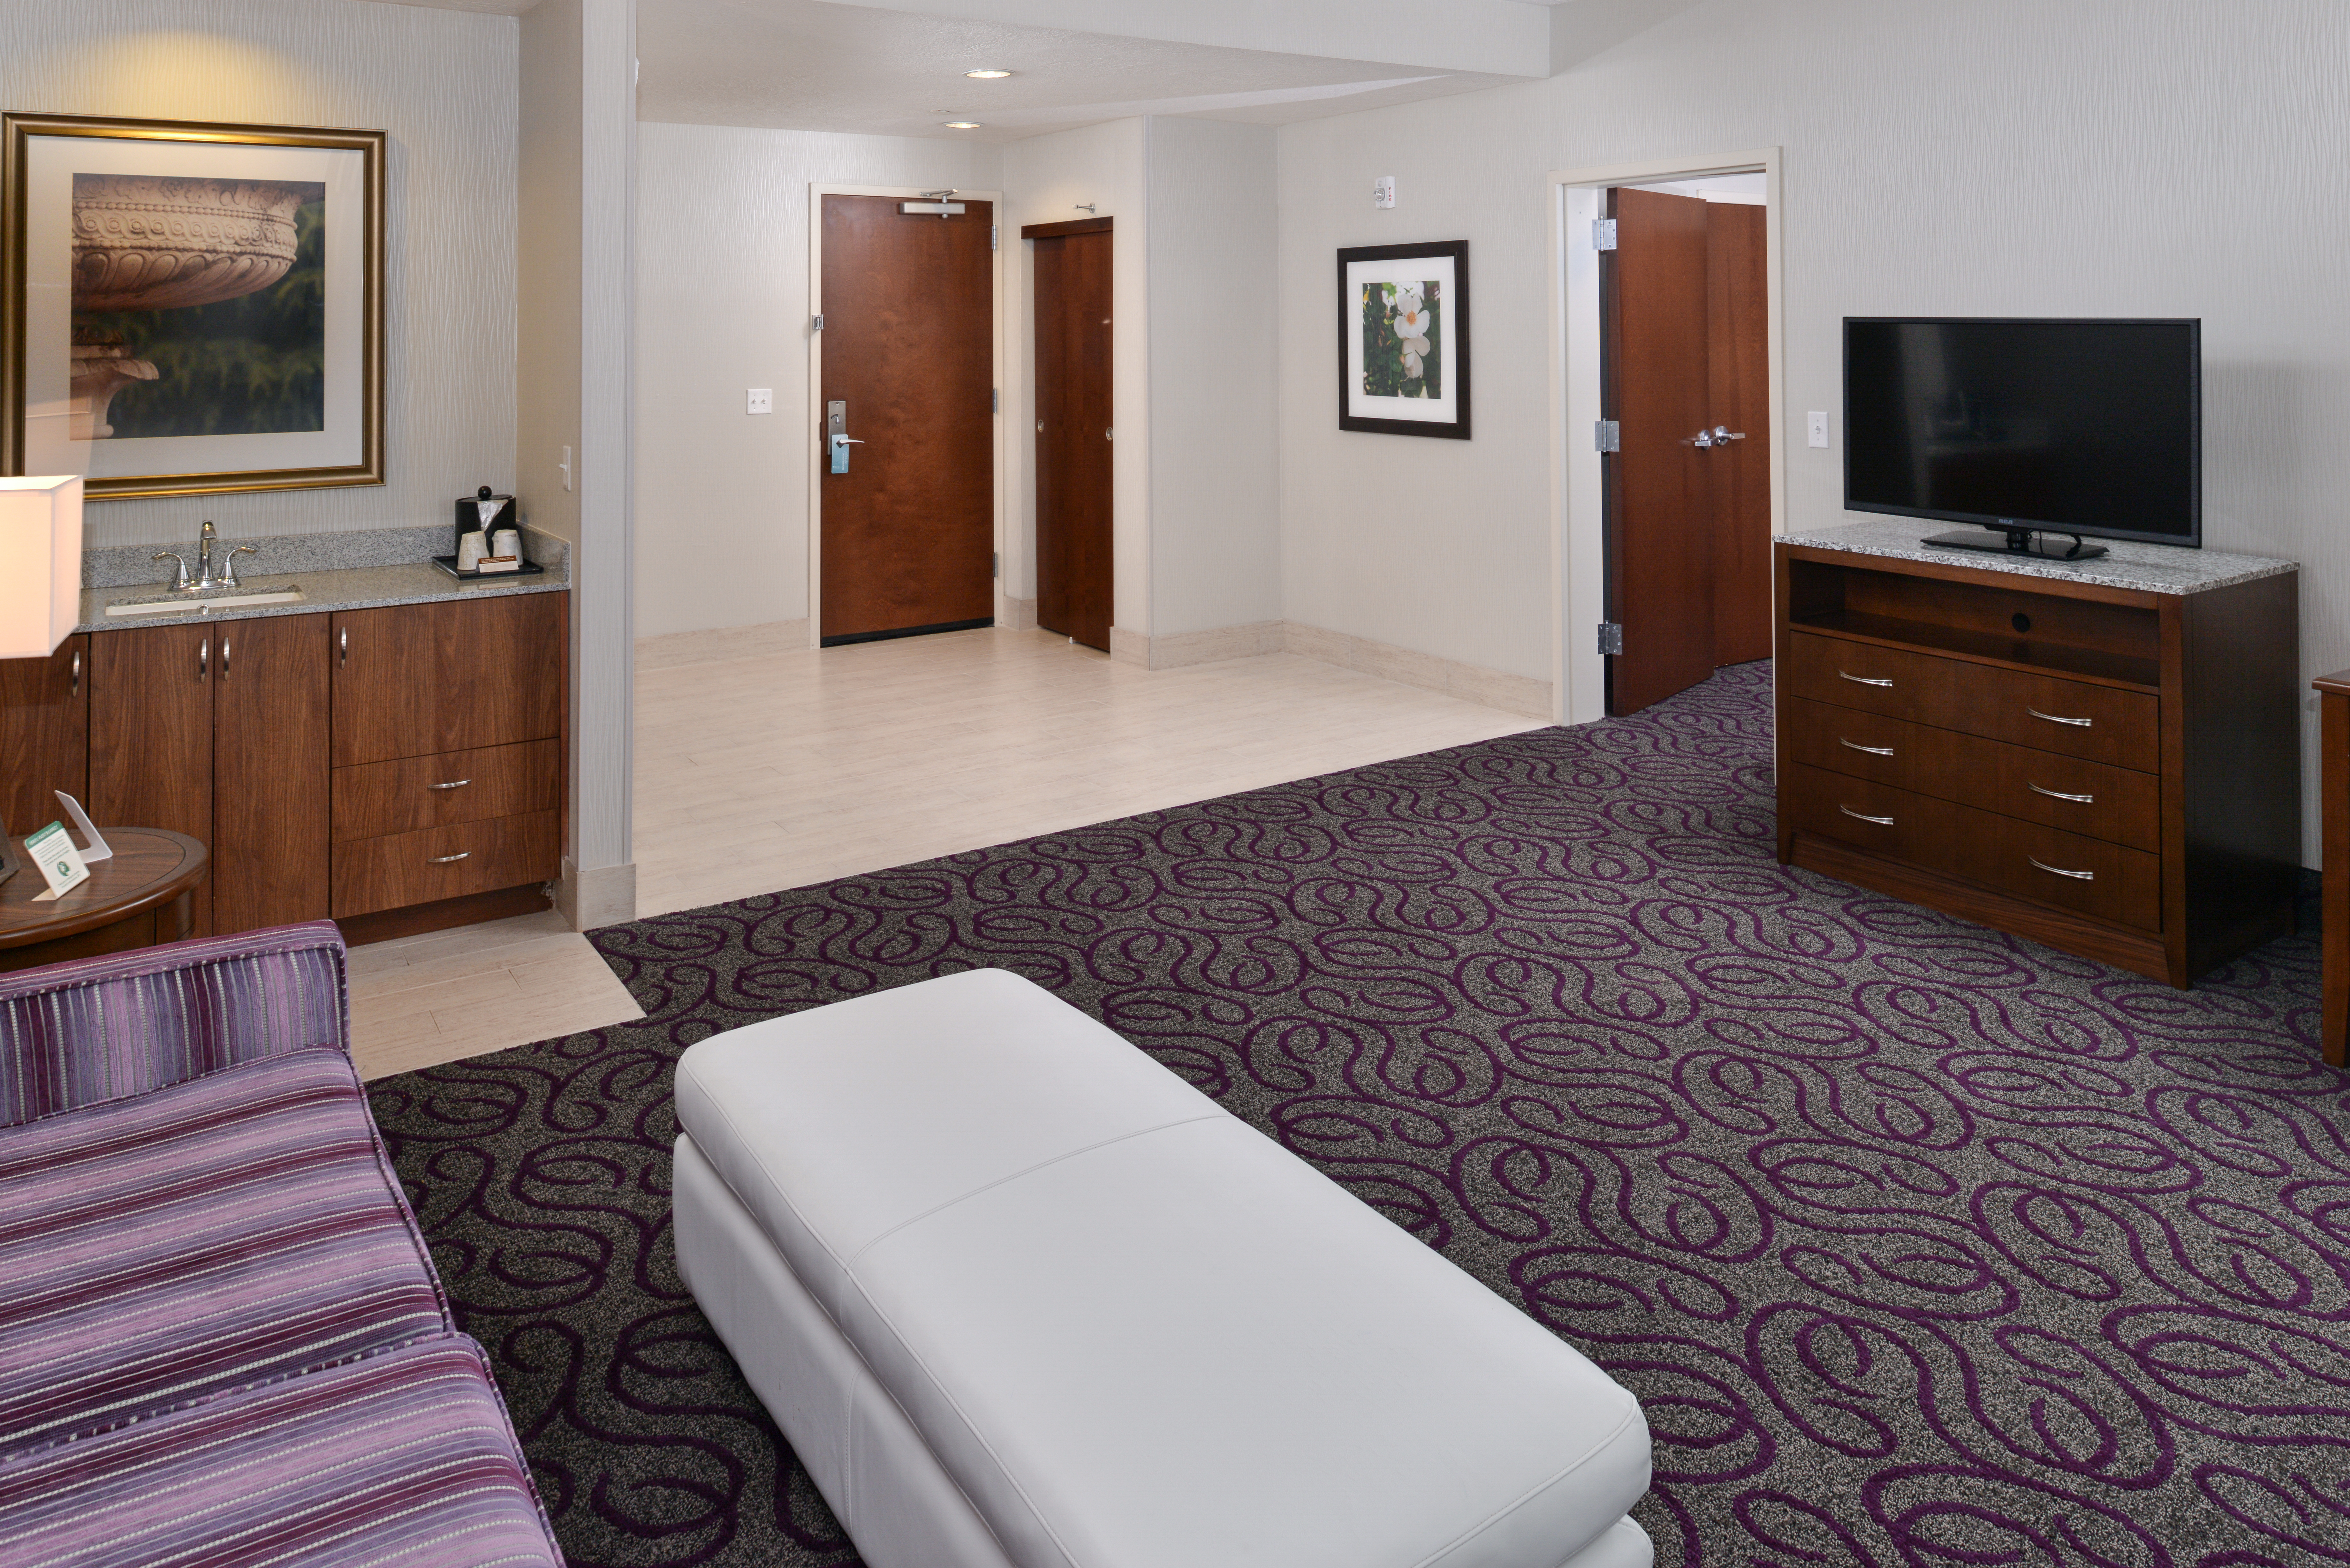 Living Suite With Wet Bar Area, Entry, Wall Art, Open Doorway to Bedroom, TV, Sofa, and Ottoman